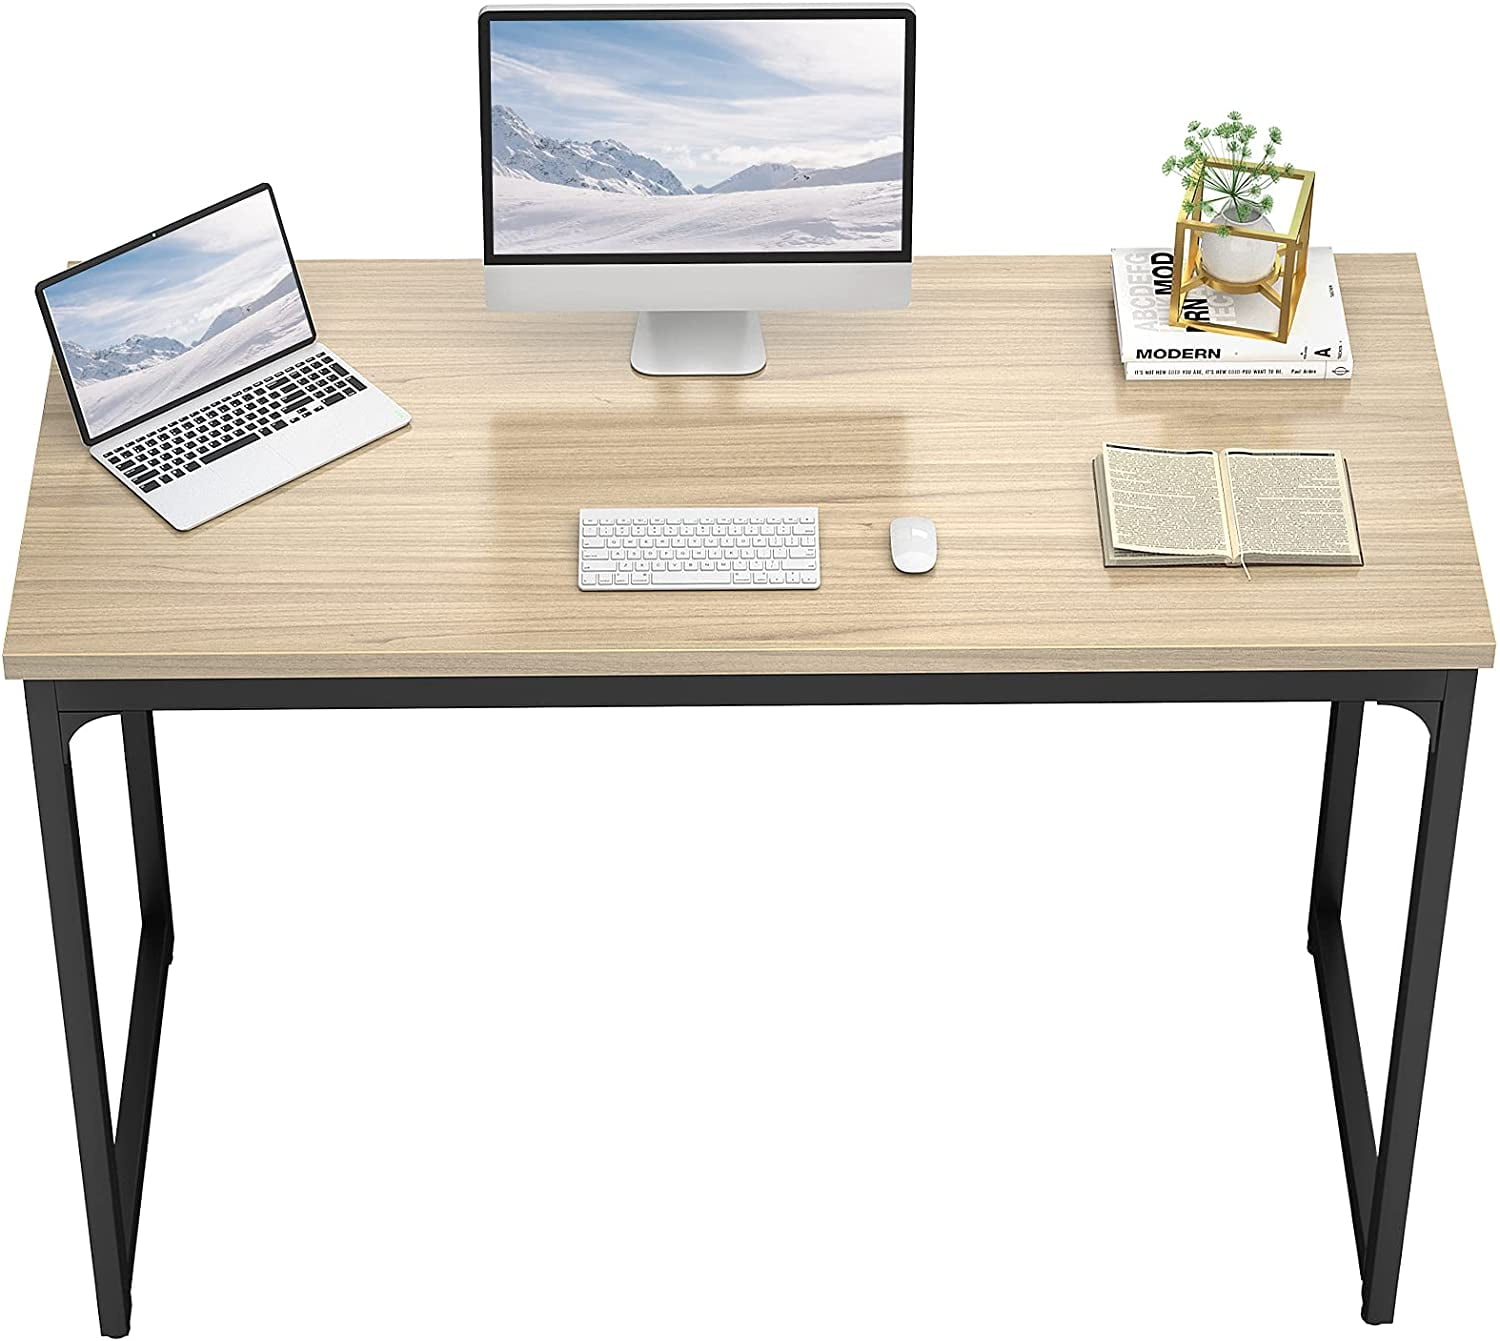 47” Modern Compact Small Space Computer Office Desk with Bookshelf